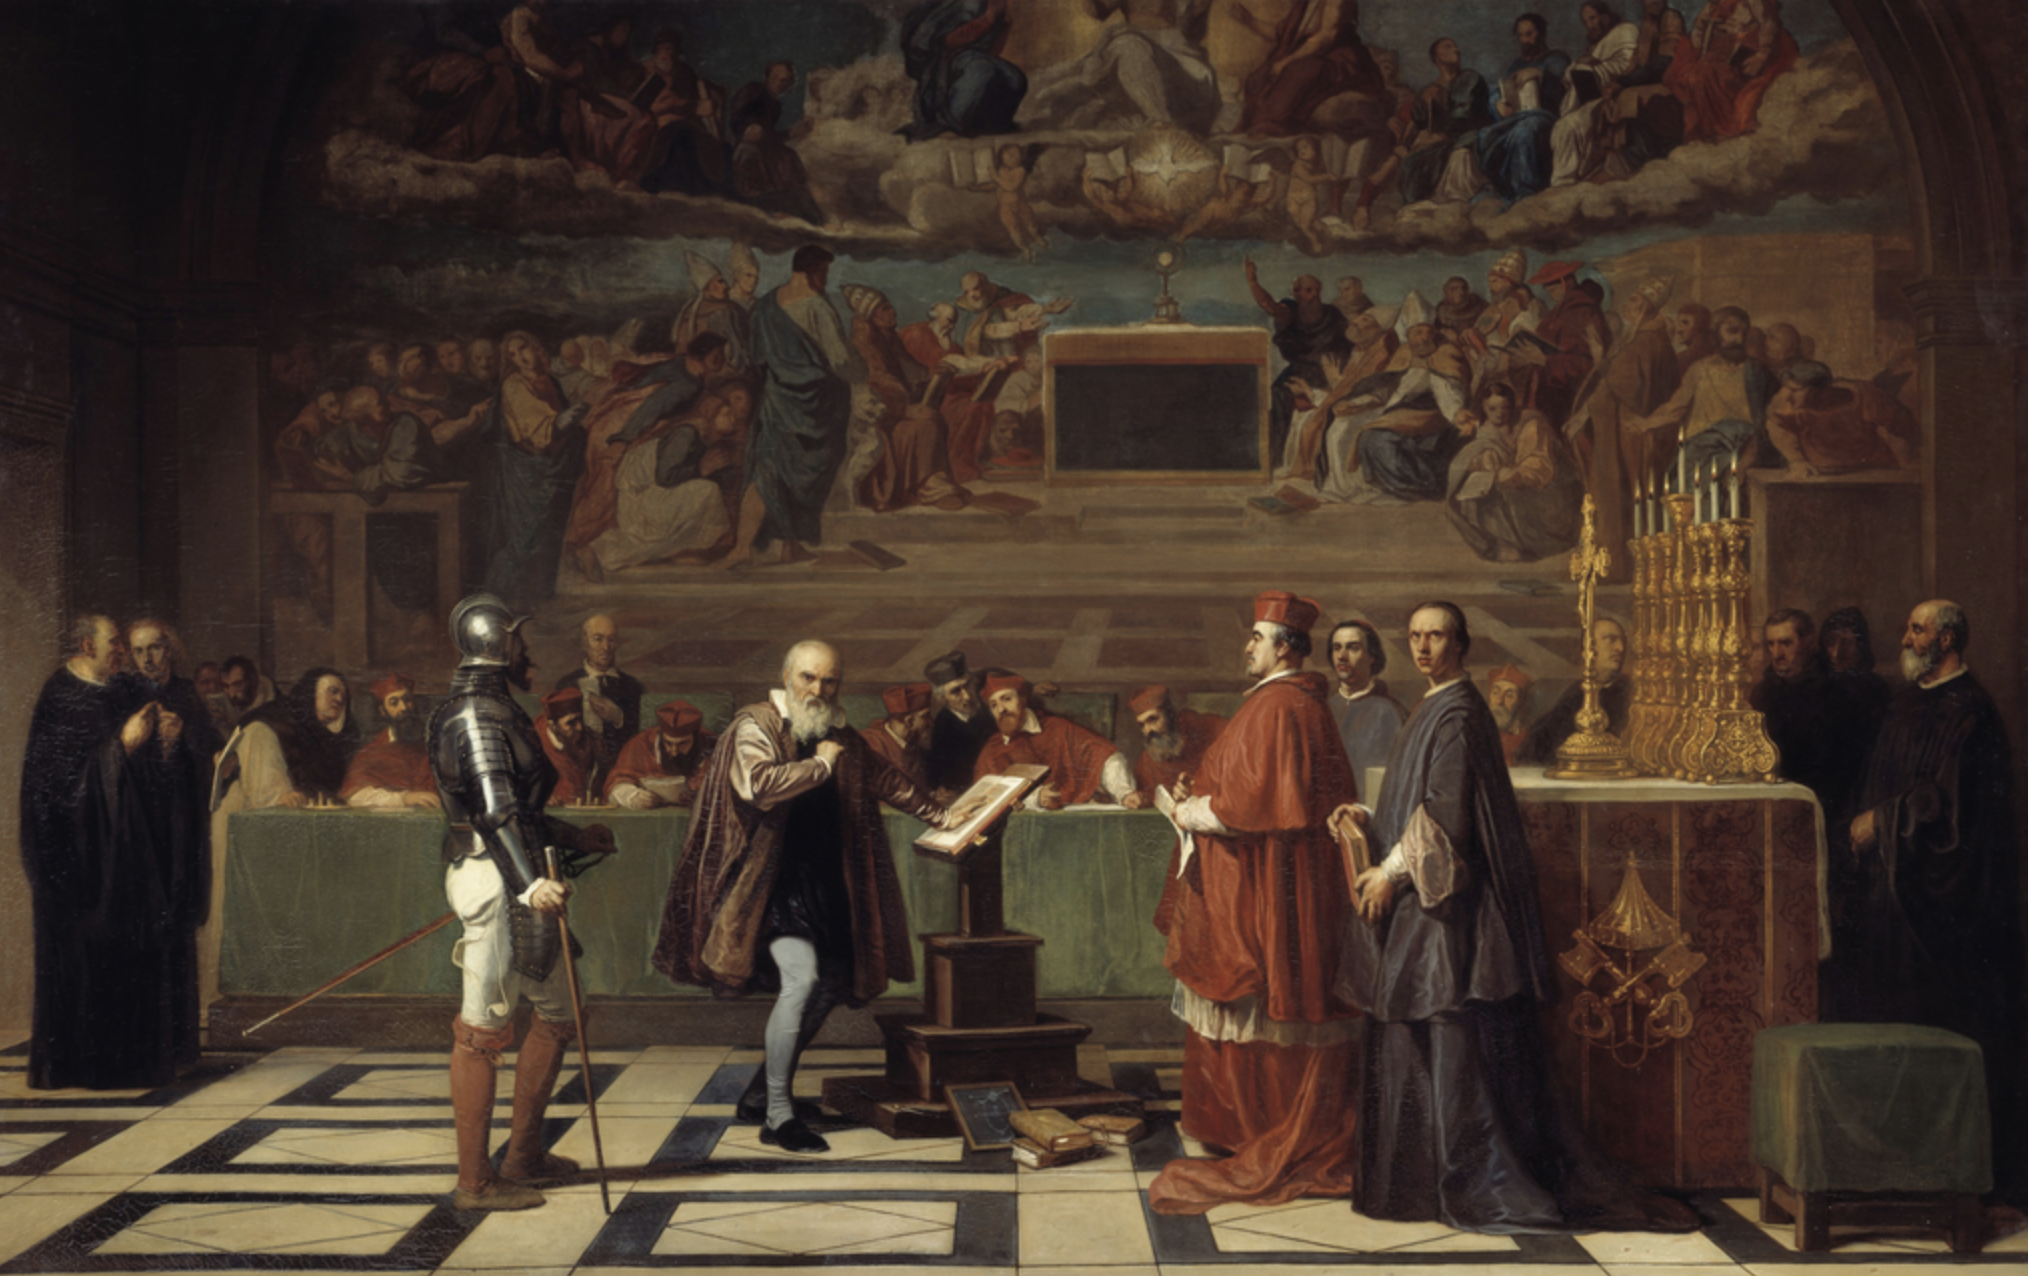 Galileo's heresy trial before the Holy Office of the Inquisition